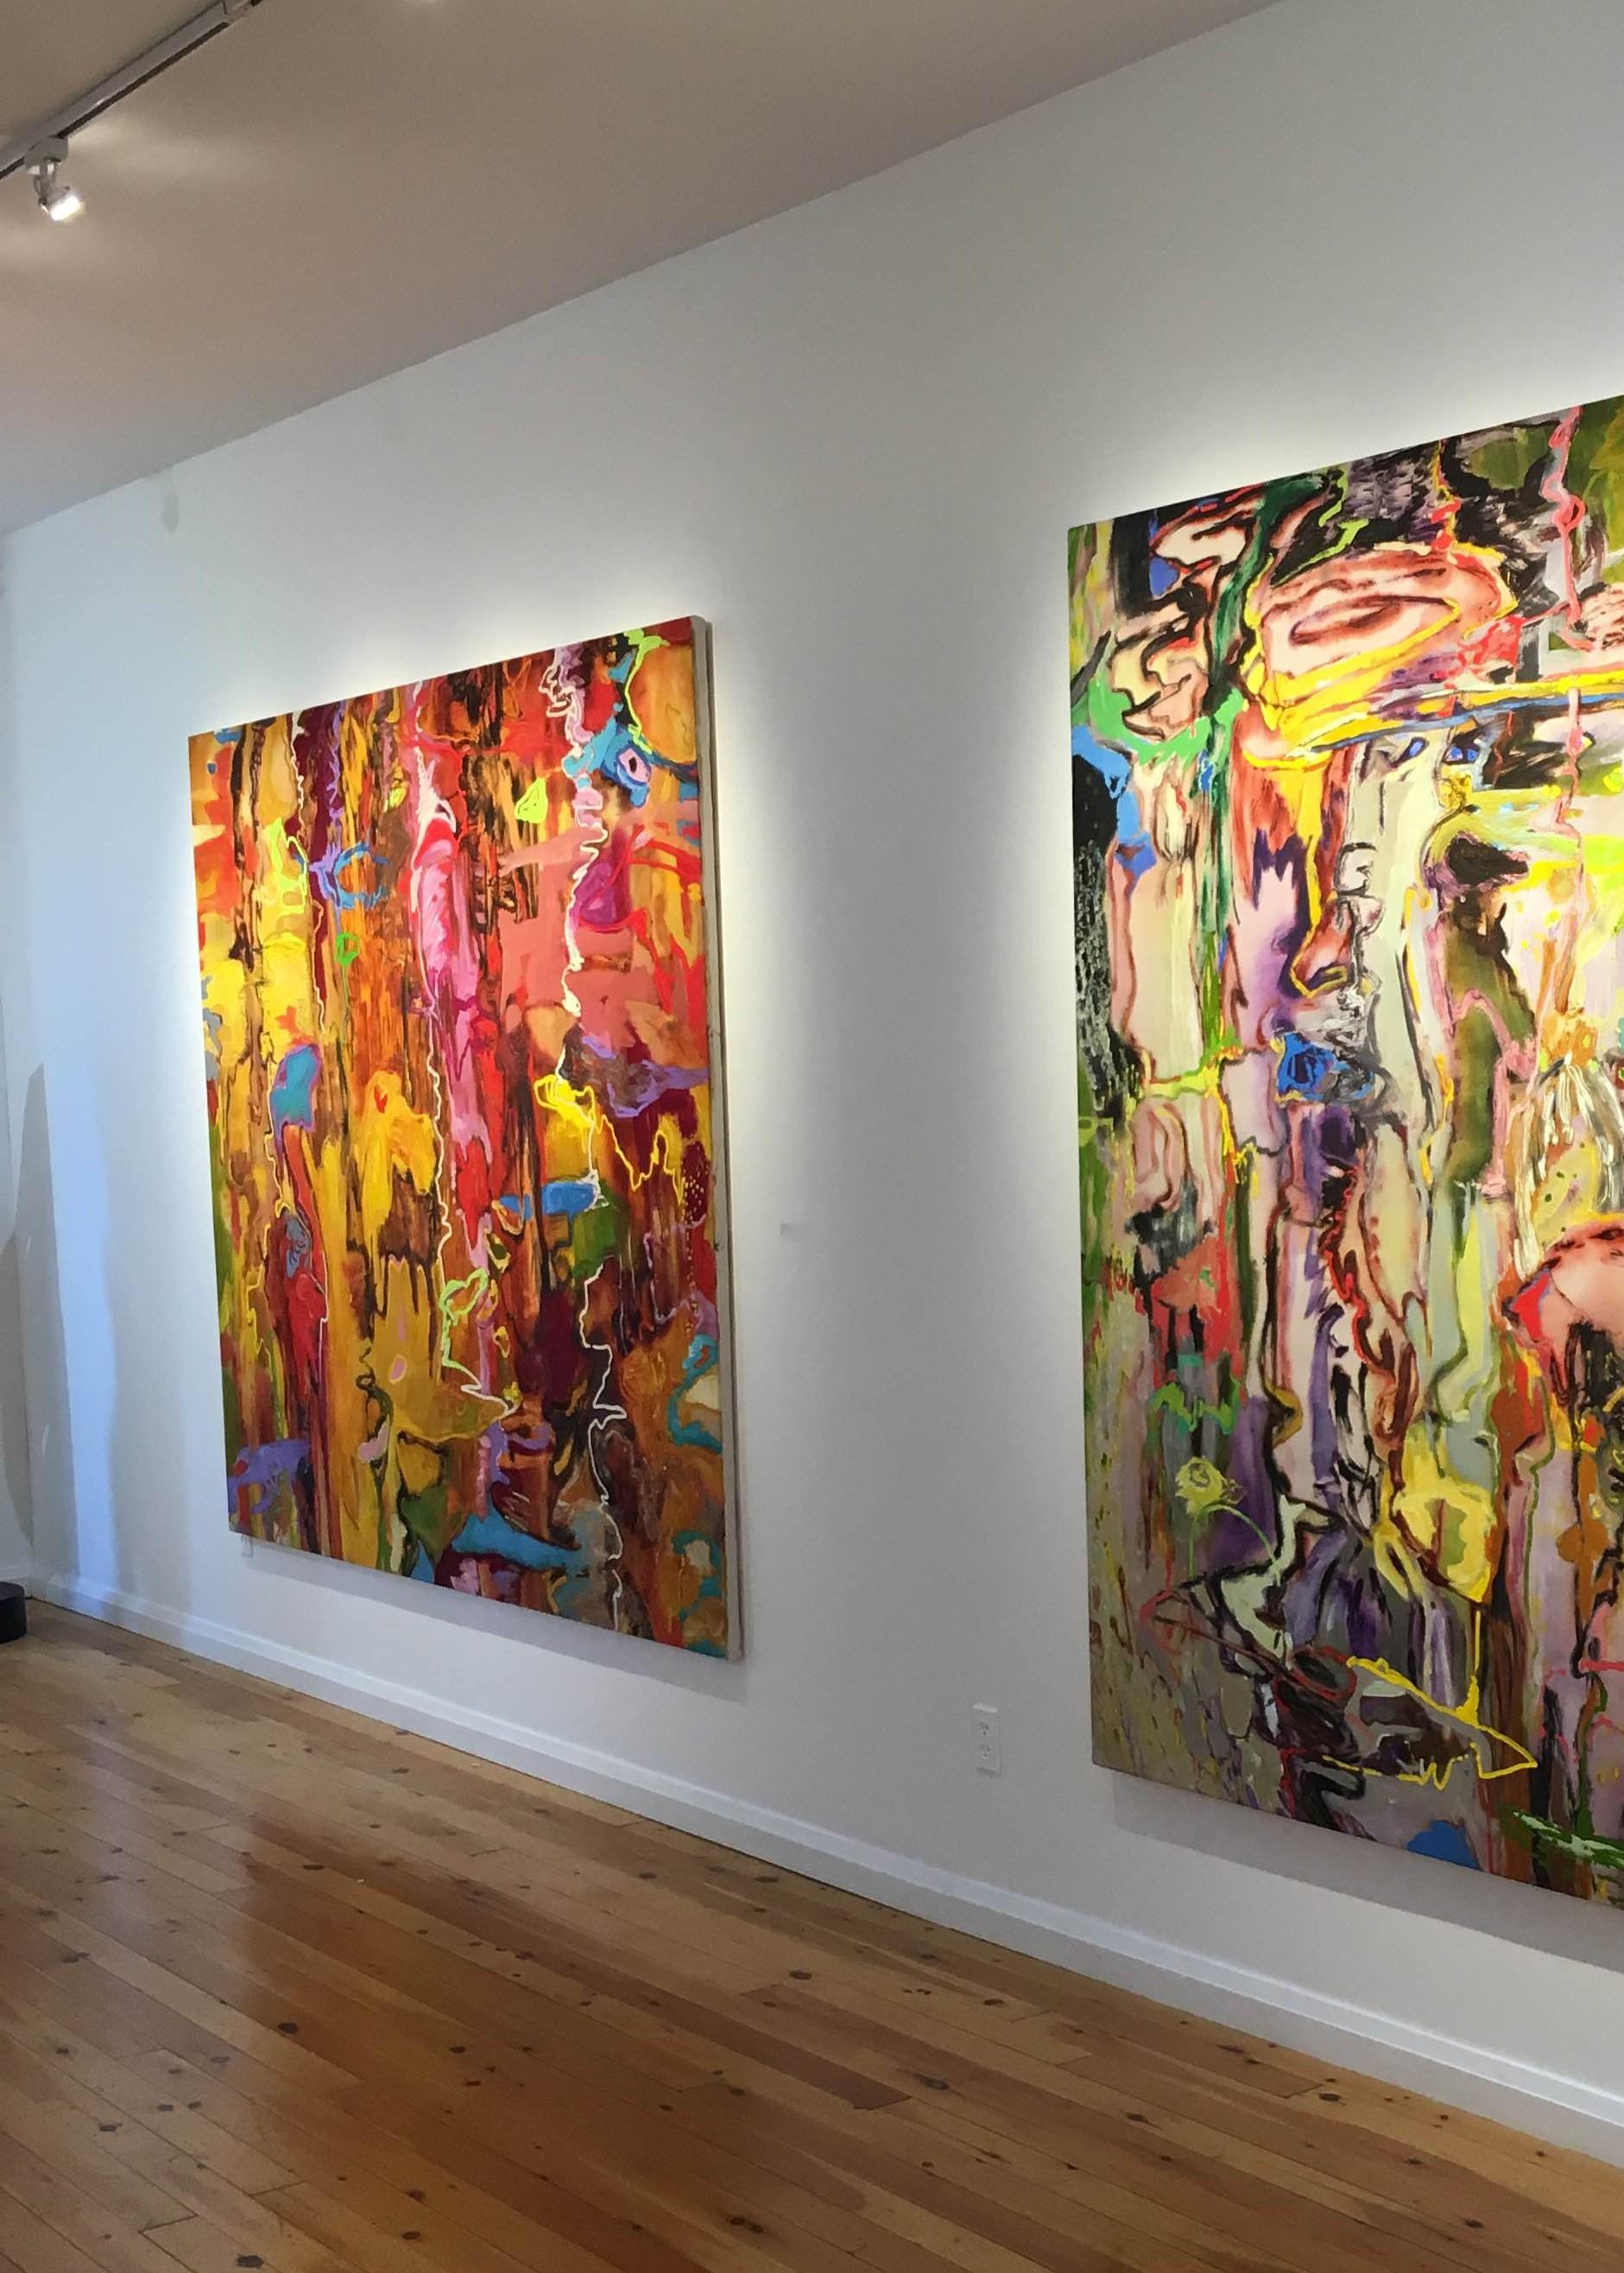 Alexander’s canvases exhibit high colour contrasts using a combination of dry and wet brushwork. Canvases display the artist’s gestural painting style, and have a matte finish. Paintings are ready to hang framed or unframed.

David T. Alexander is